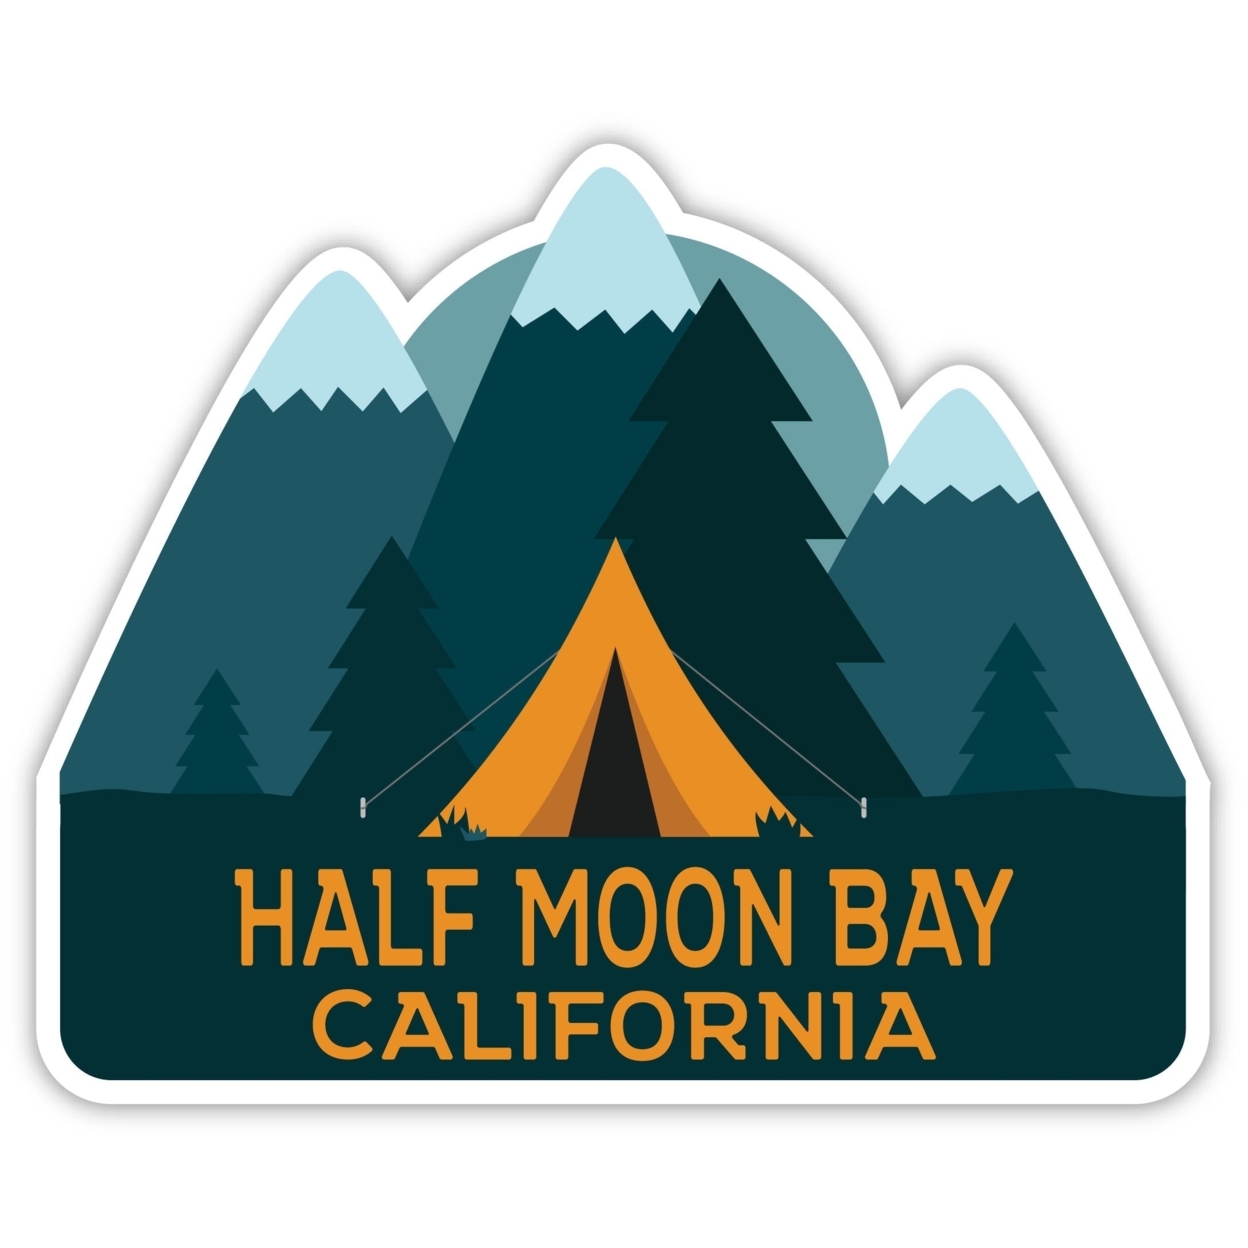 Half Moon Bay California Souvenir Decorative Stickers (Choose Theme And Size) - 4-Pack, 10-Inch, Tent